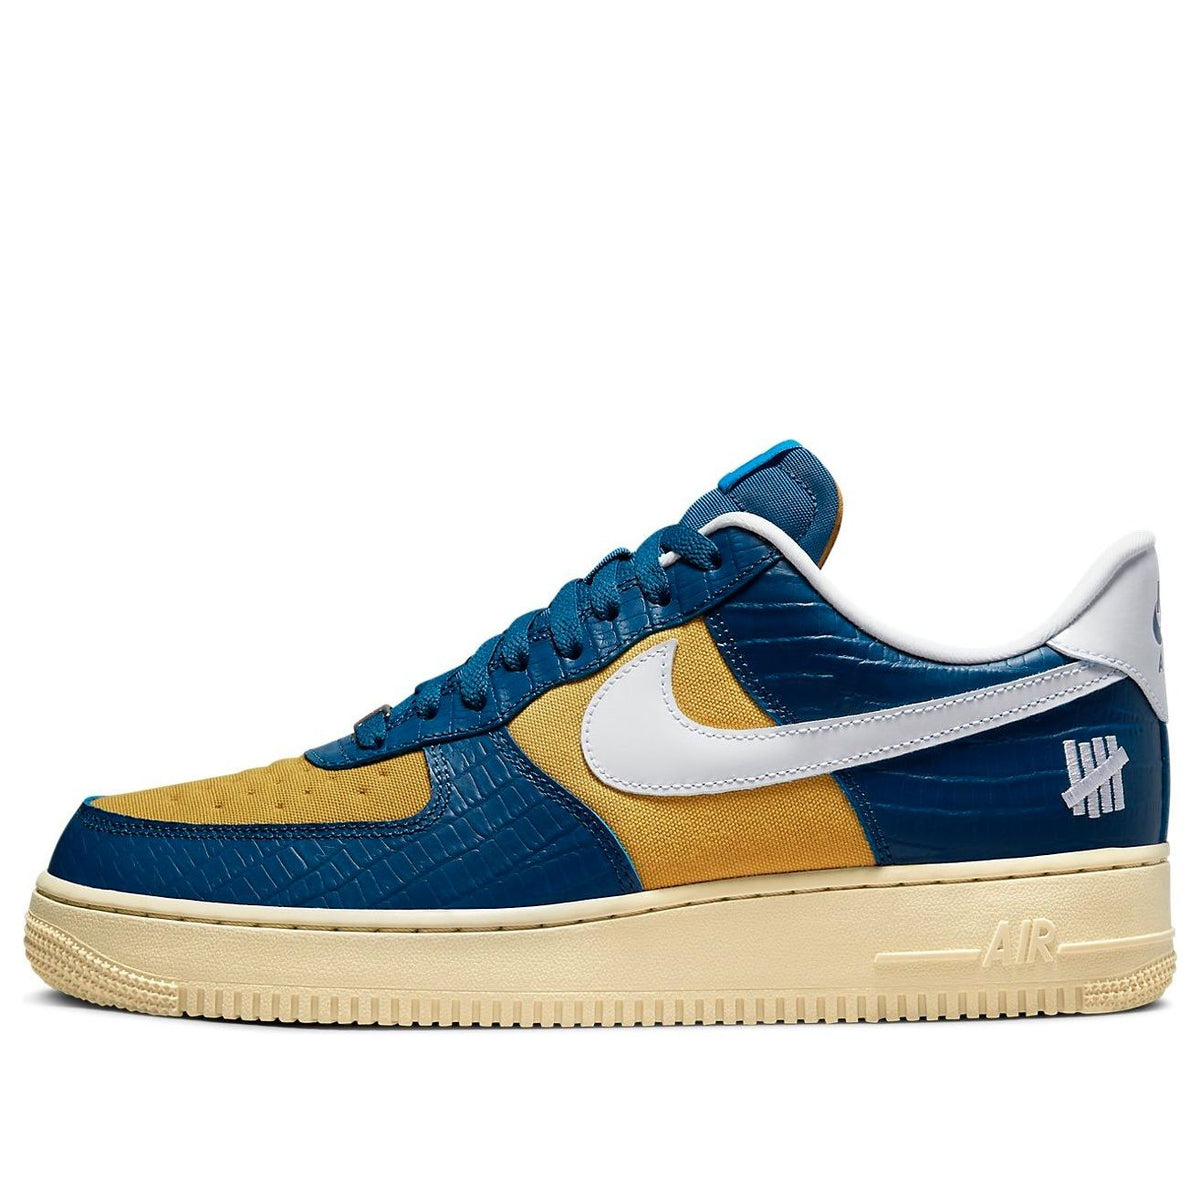 Nike Undefeated x Air Force 1 Low SP 'Dunk vs AF1' DM8462-400 ...